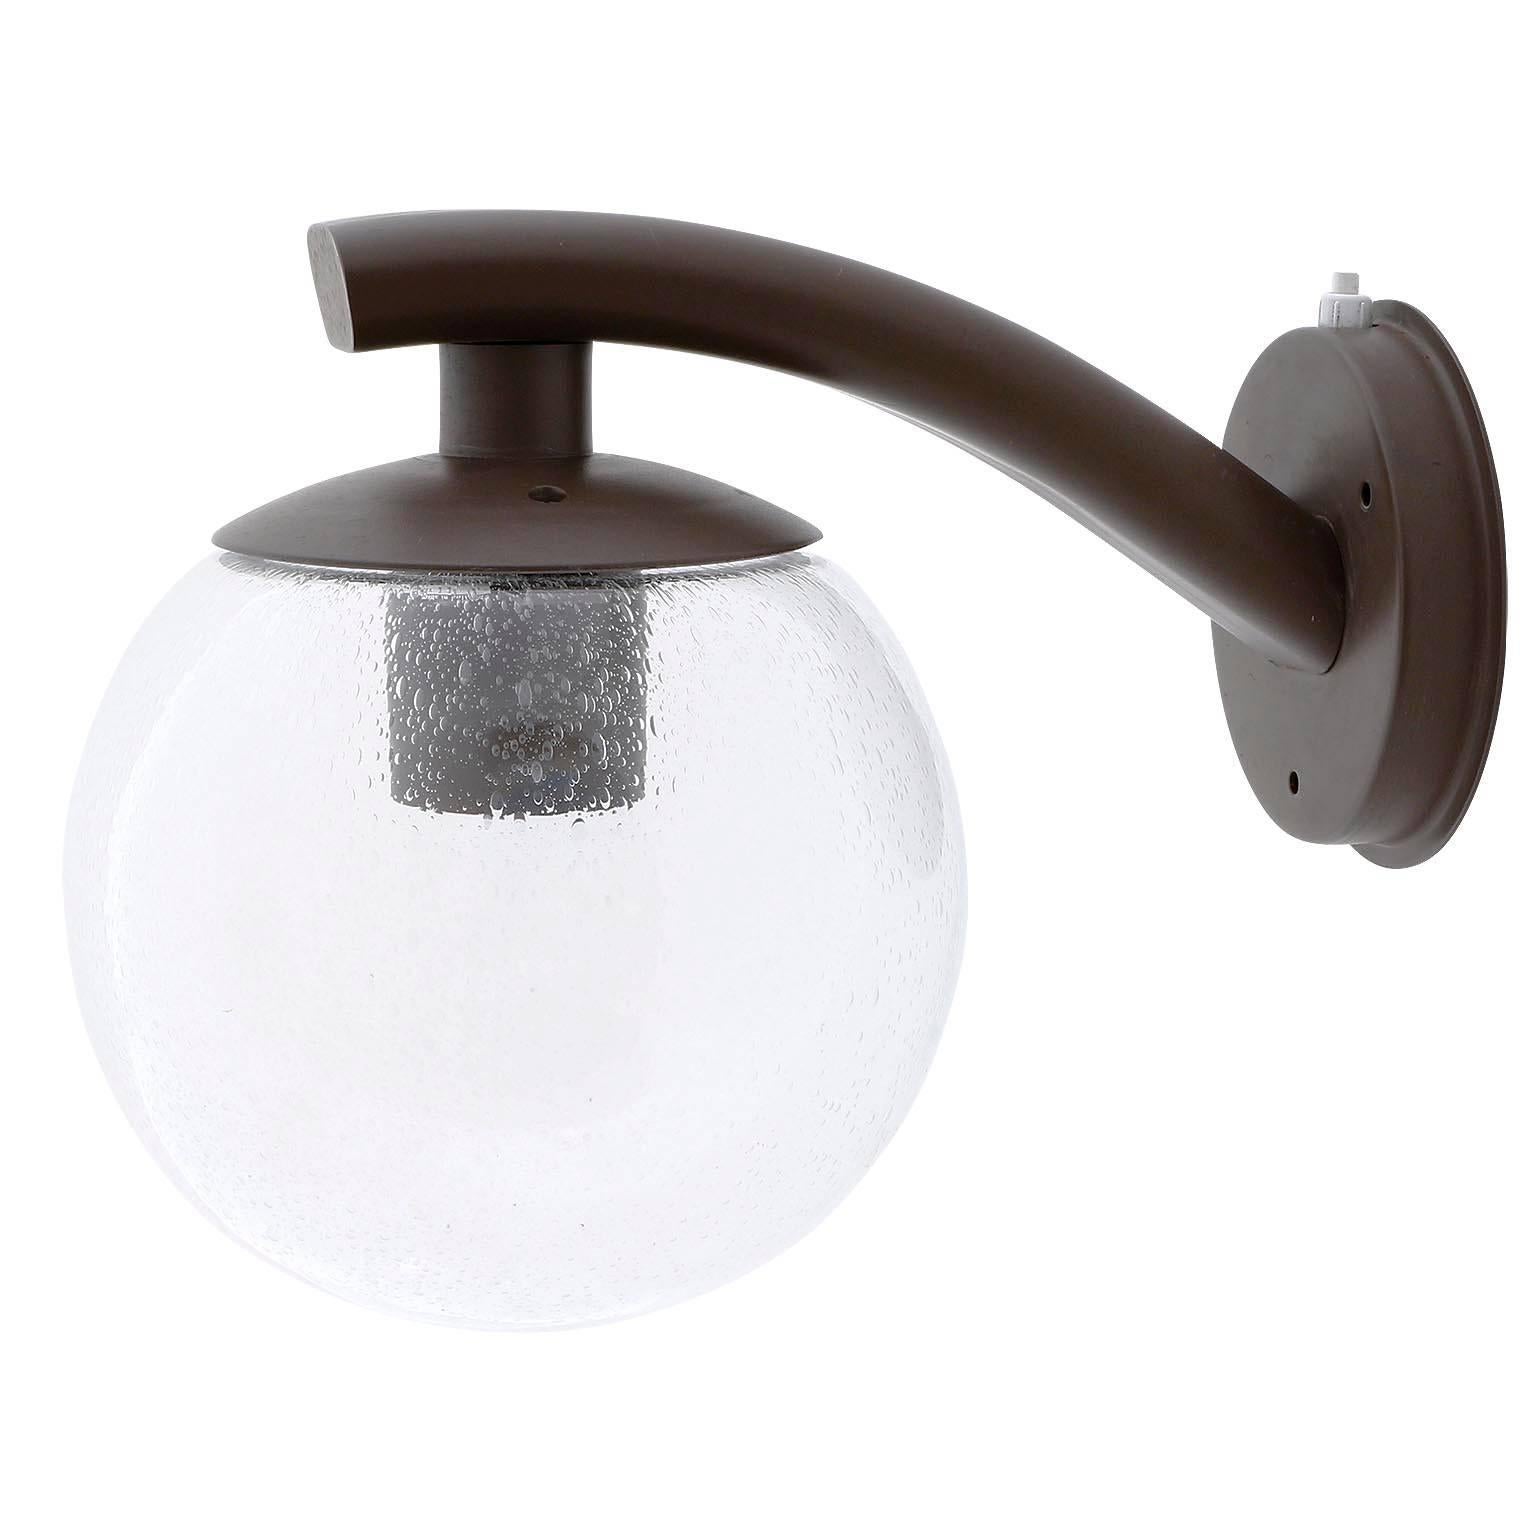 One of eight wall lamps model C-1612 by RAAK Amsterdam, Netherlands, manufactured in Mid-Century, circa 1970. A lamp as an outstreched hand. A dark brown powder-coated metal arm holds a clear bubble glass globe. An integrated switch can also be